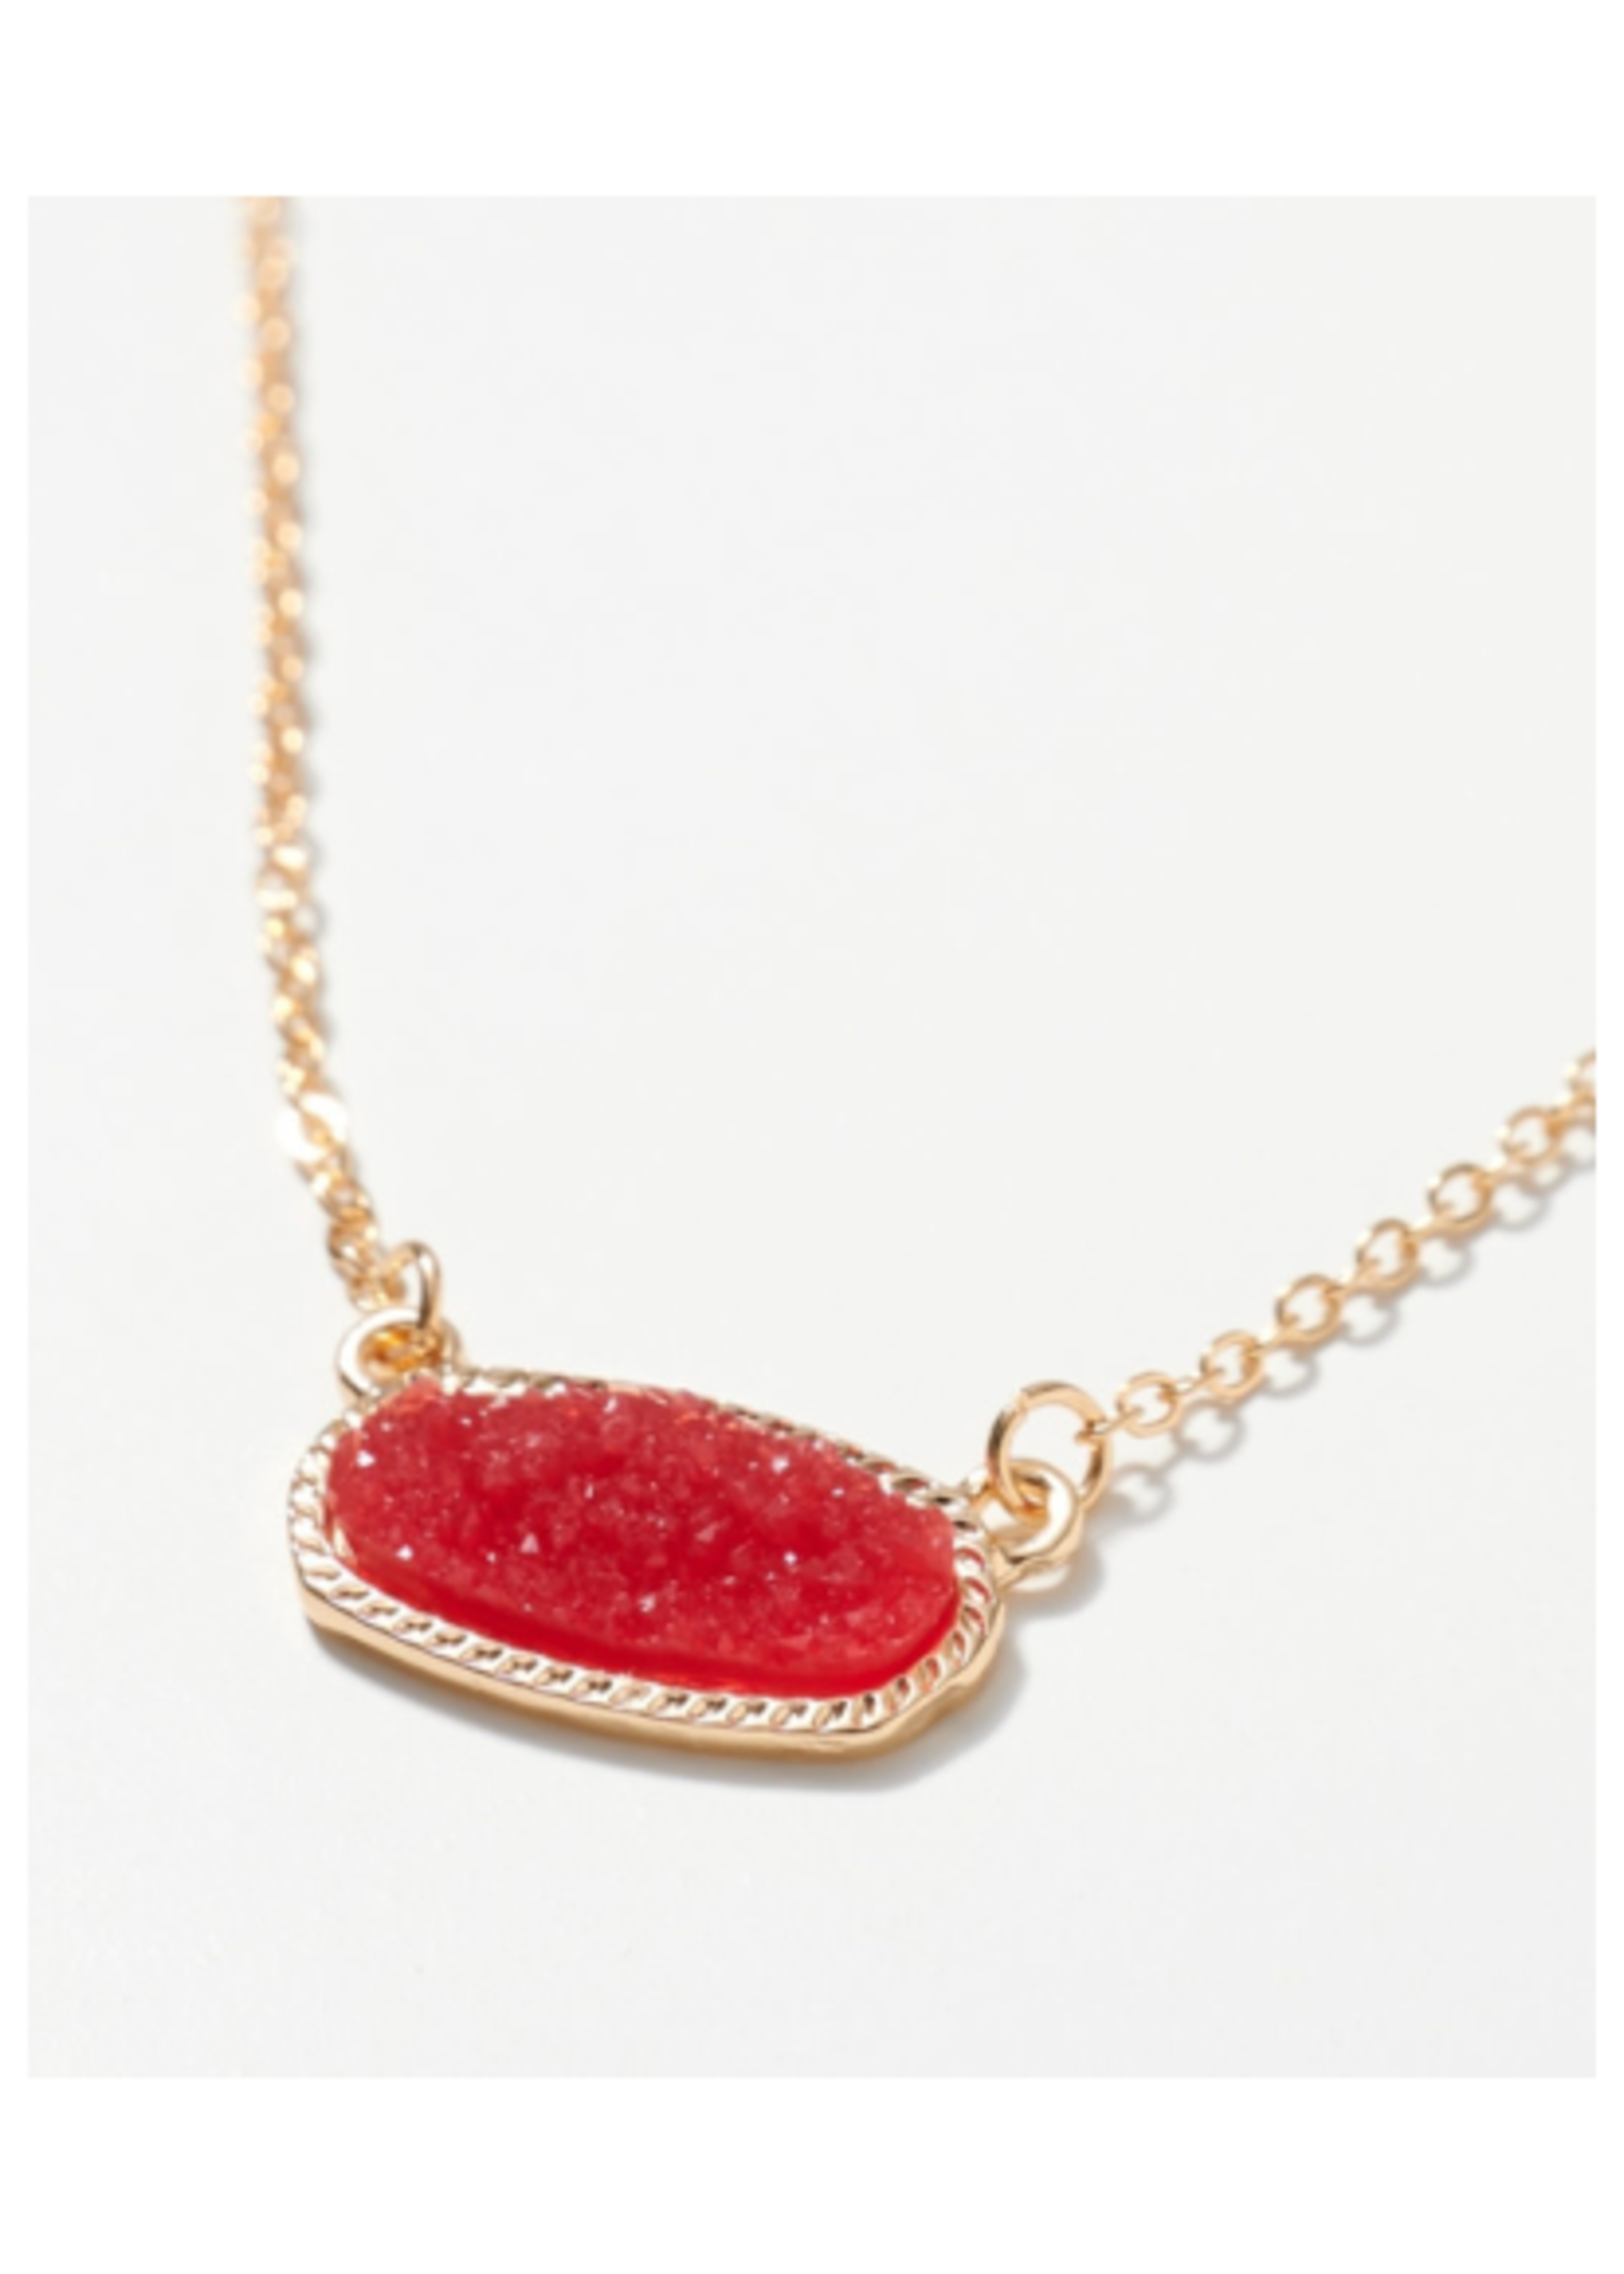 Gemstone Charm Necklace - Red